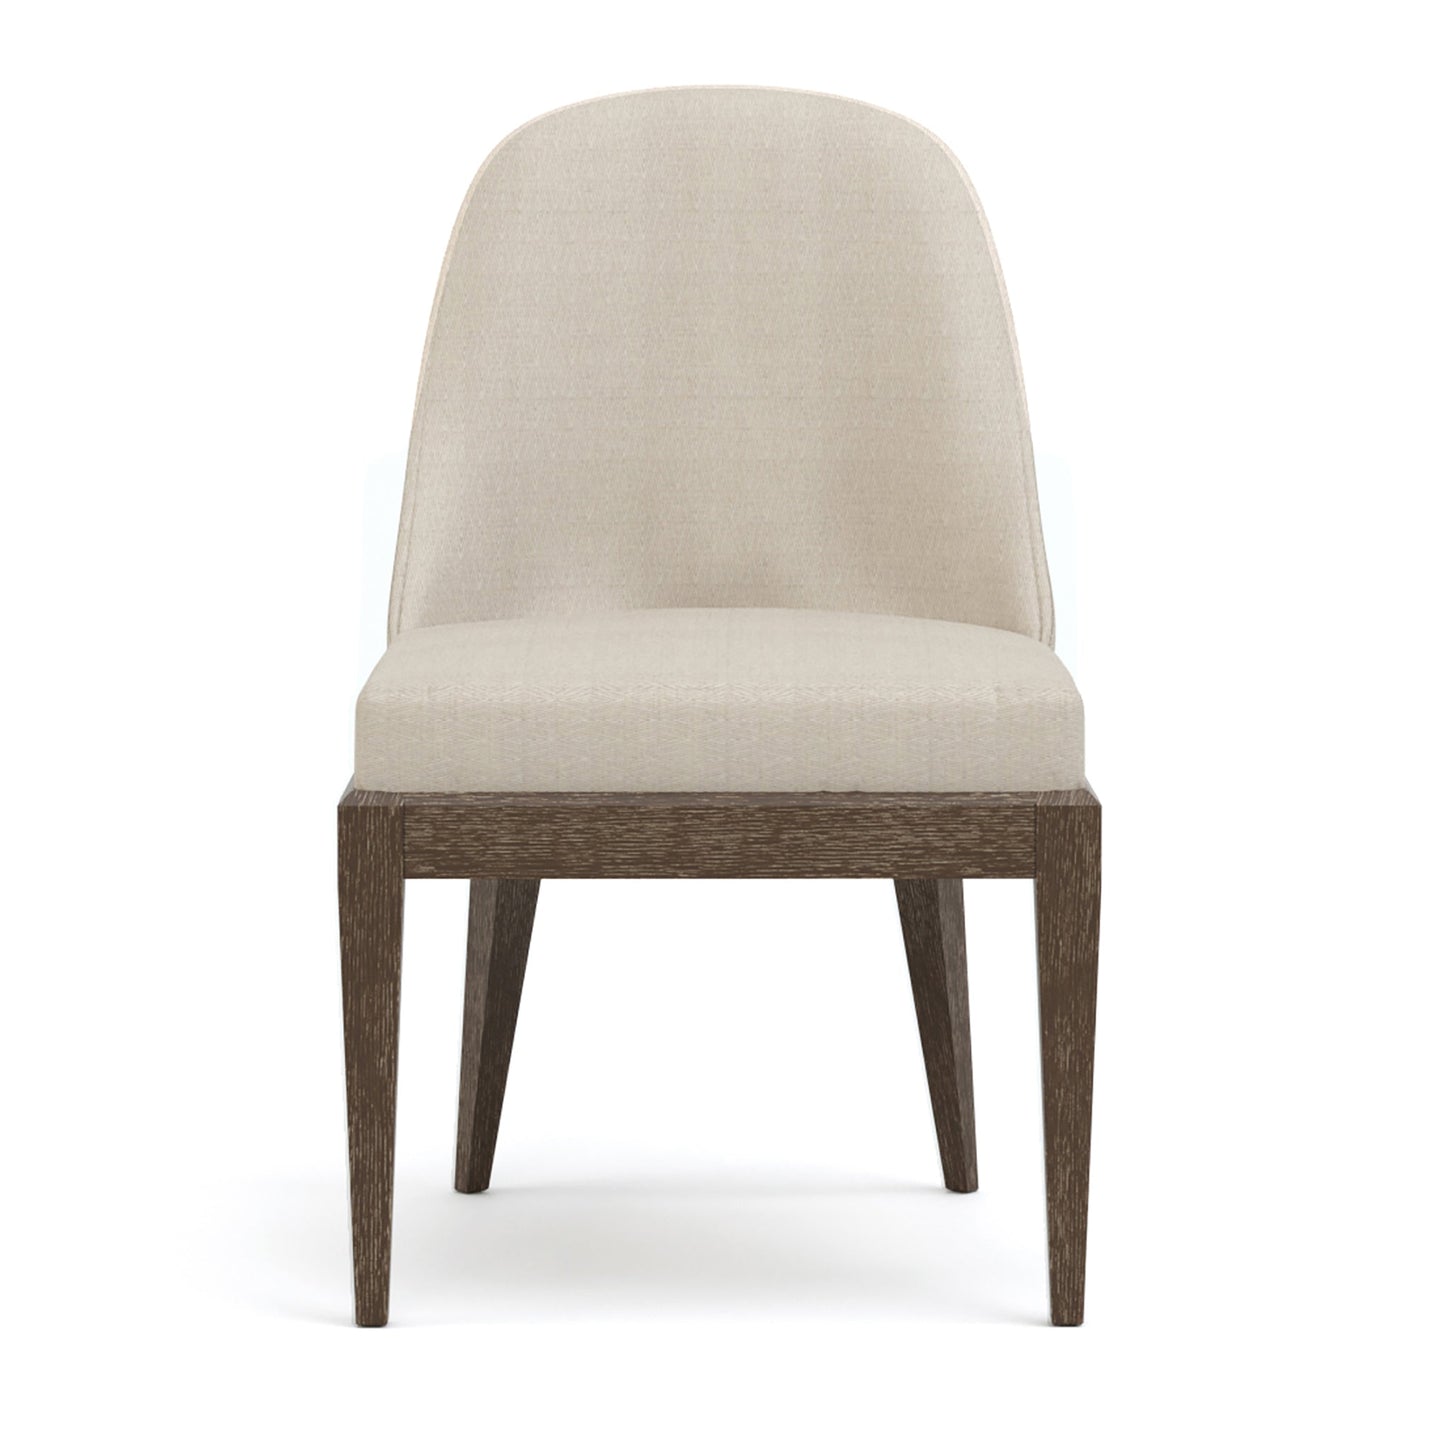 Maidstone Upholstered Side Chair in 202 Pier finish